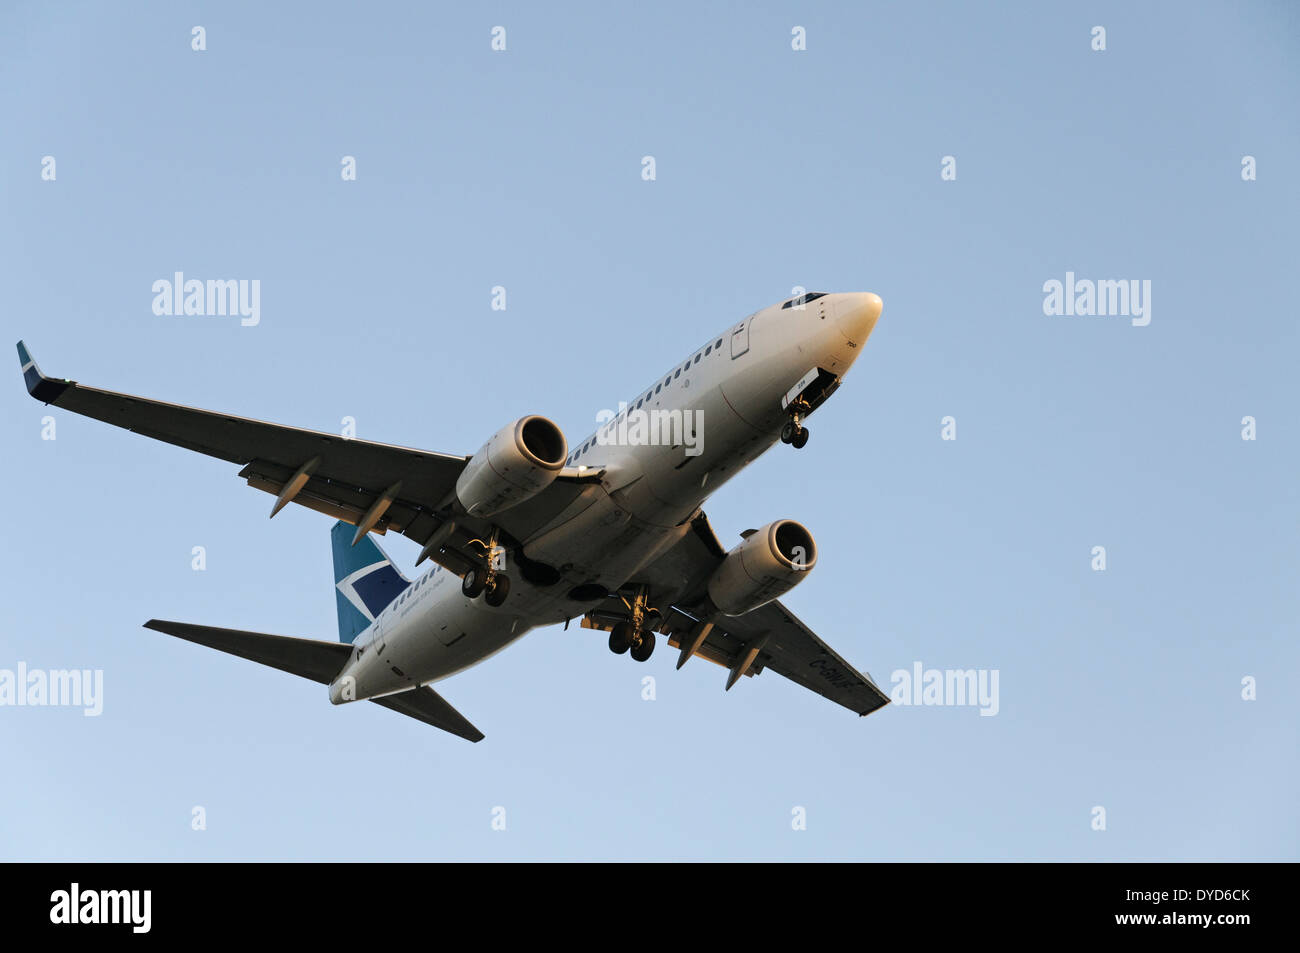 A Westjet Airlines Boeing 737 (737-700) narrow-body jetliner on final approach for landing at Vancouver International Airport Stock Photo